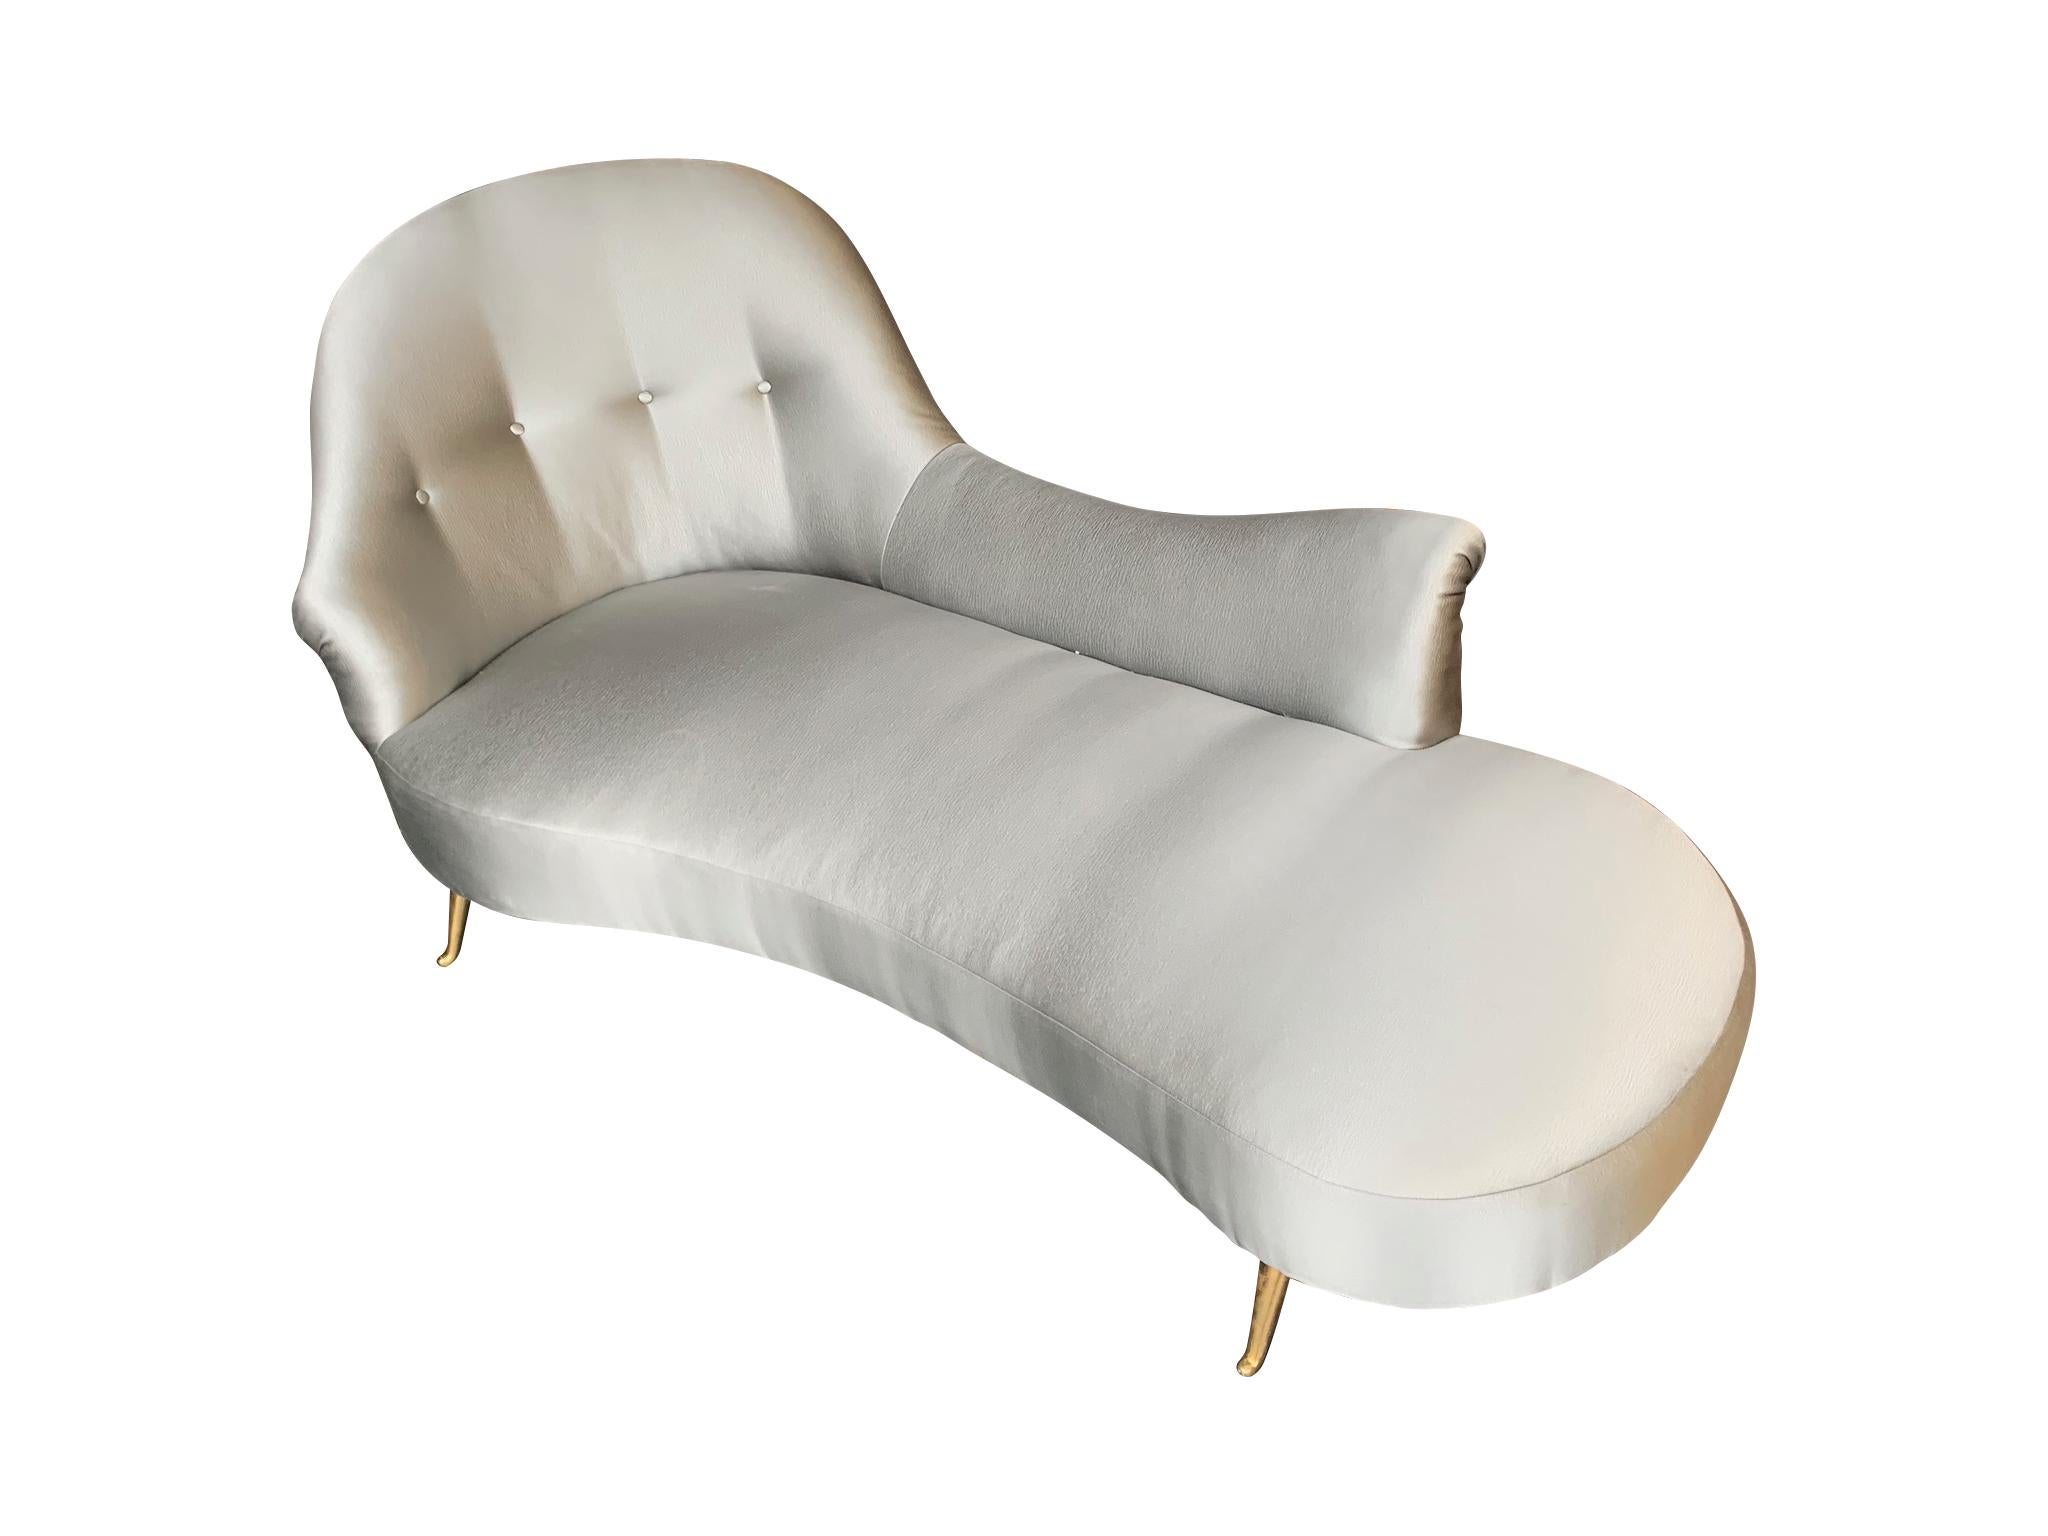 Mid-Century Modern Italian Chaise Longue Upholstered in Champagne Grey Fabric with Brass Feet